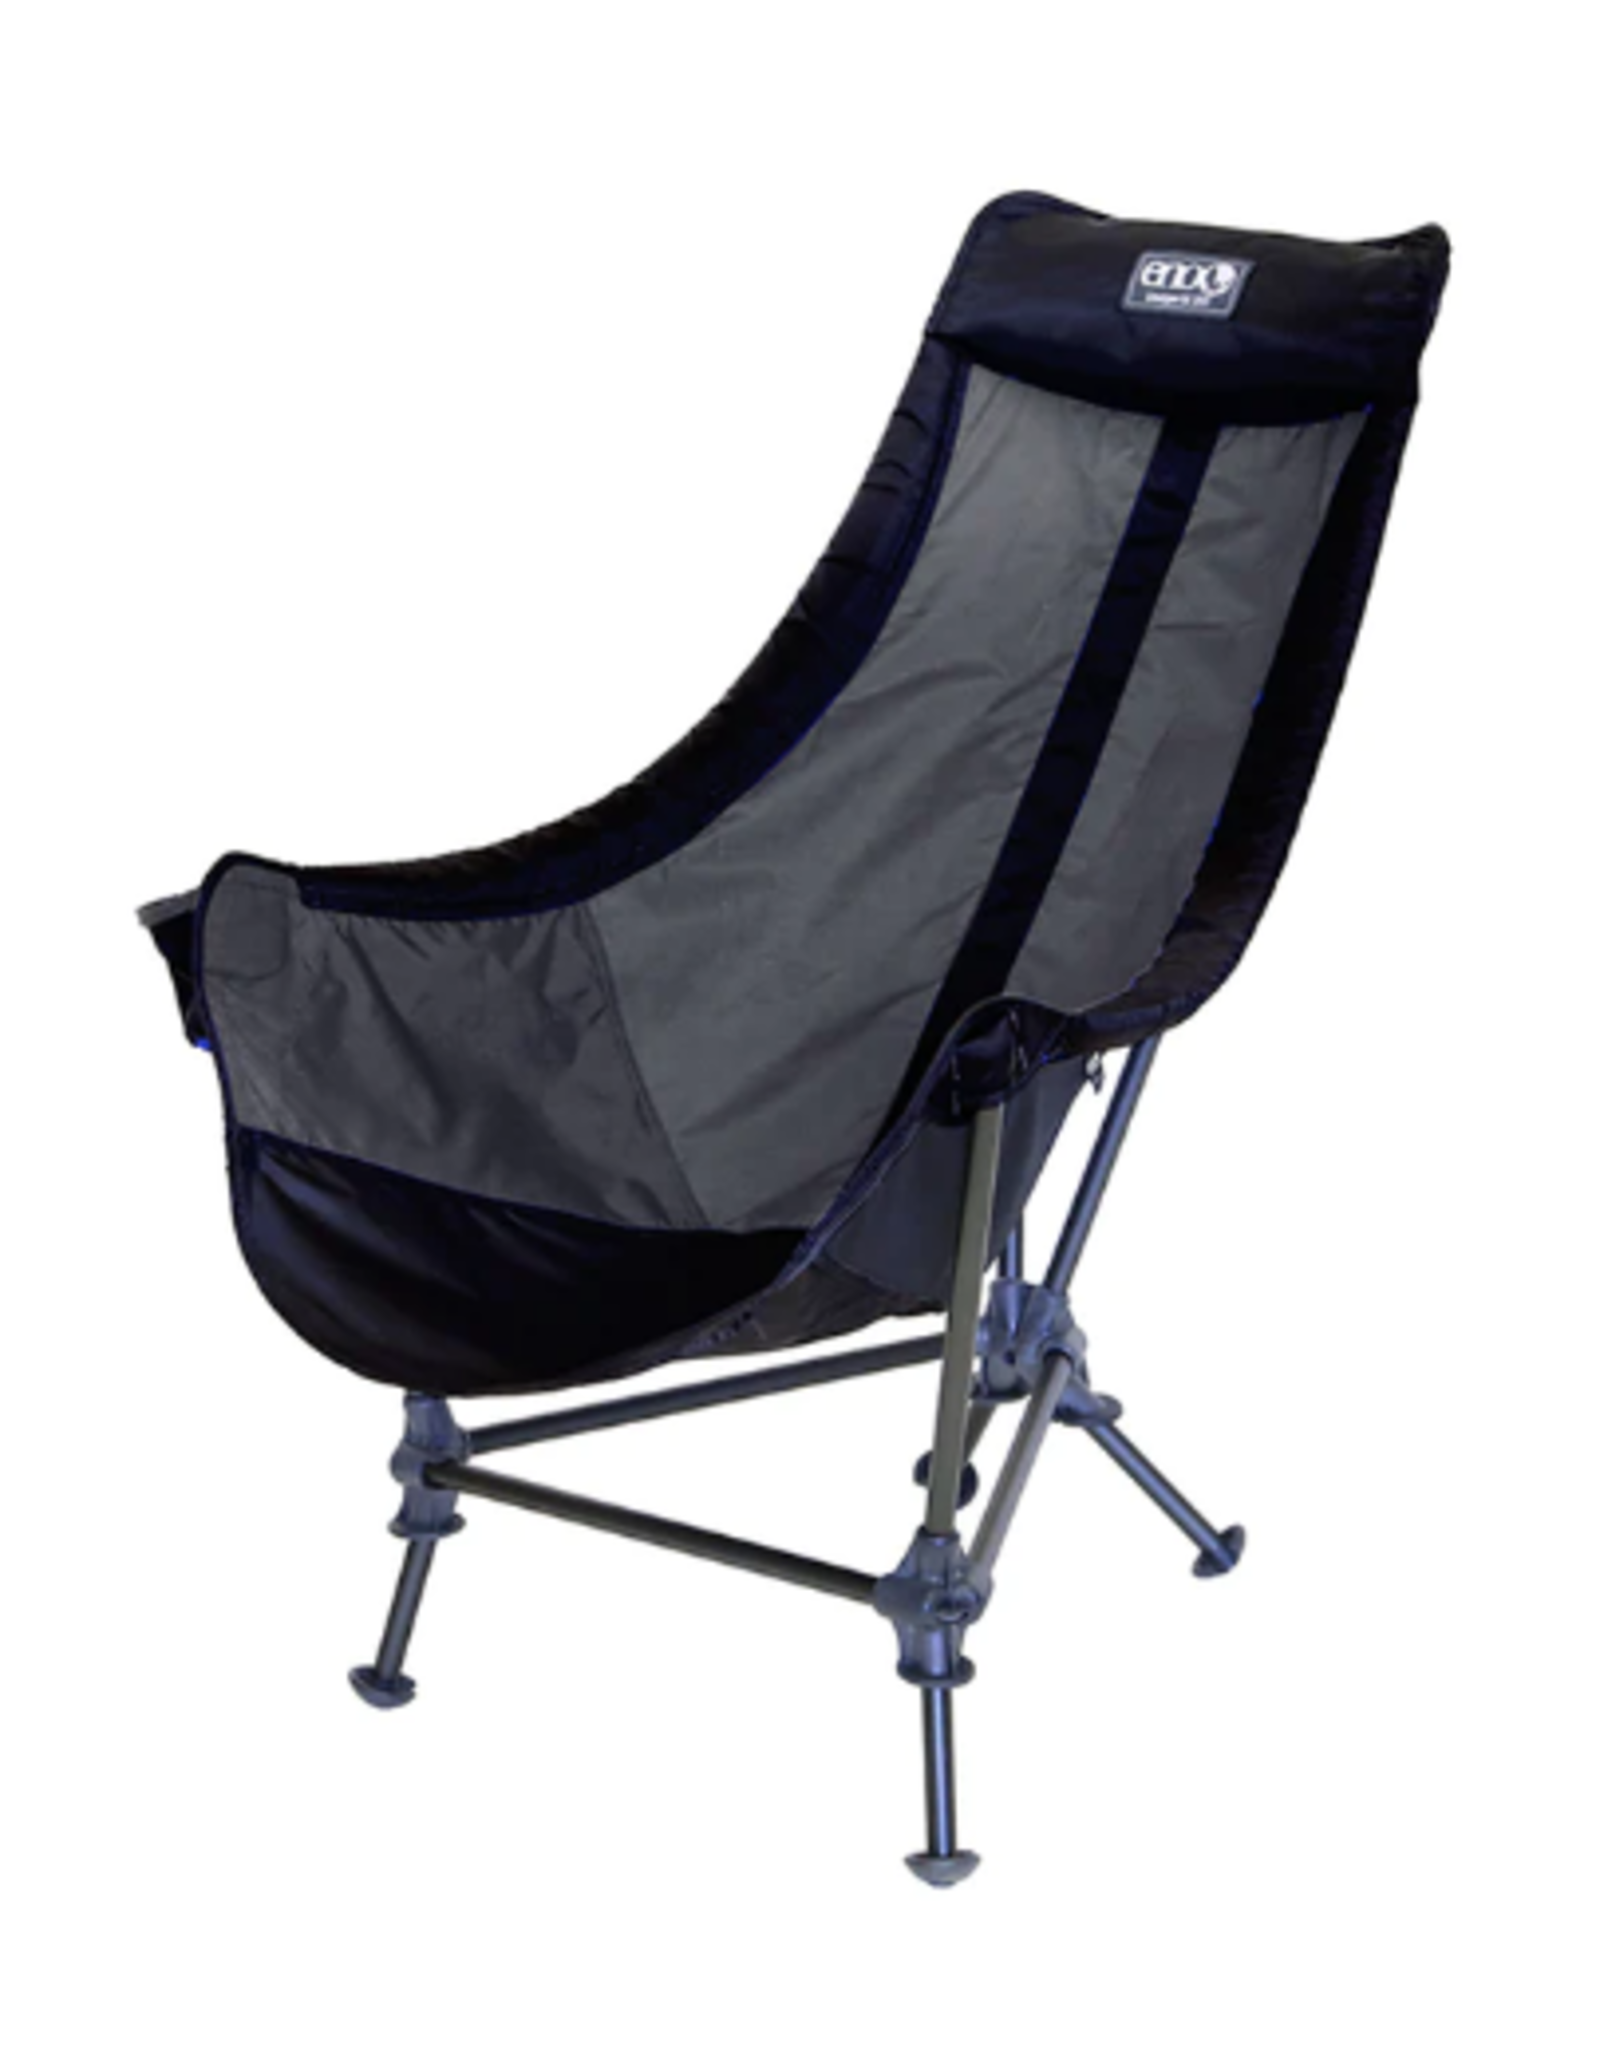 ENO Lounger™ DL Chair